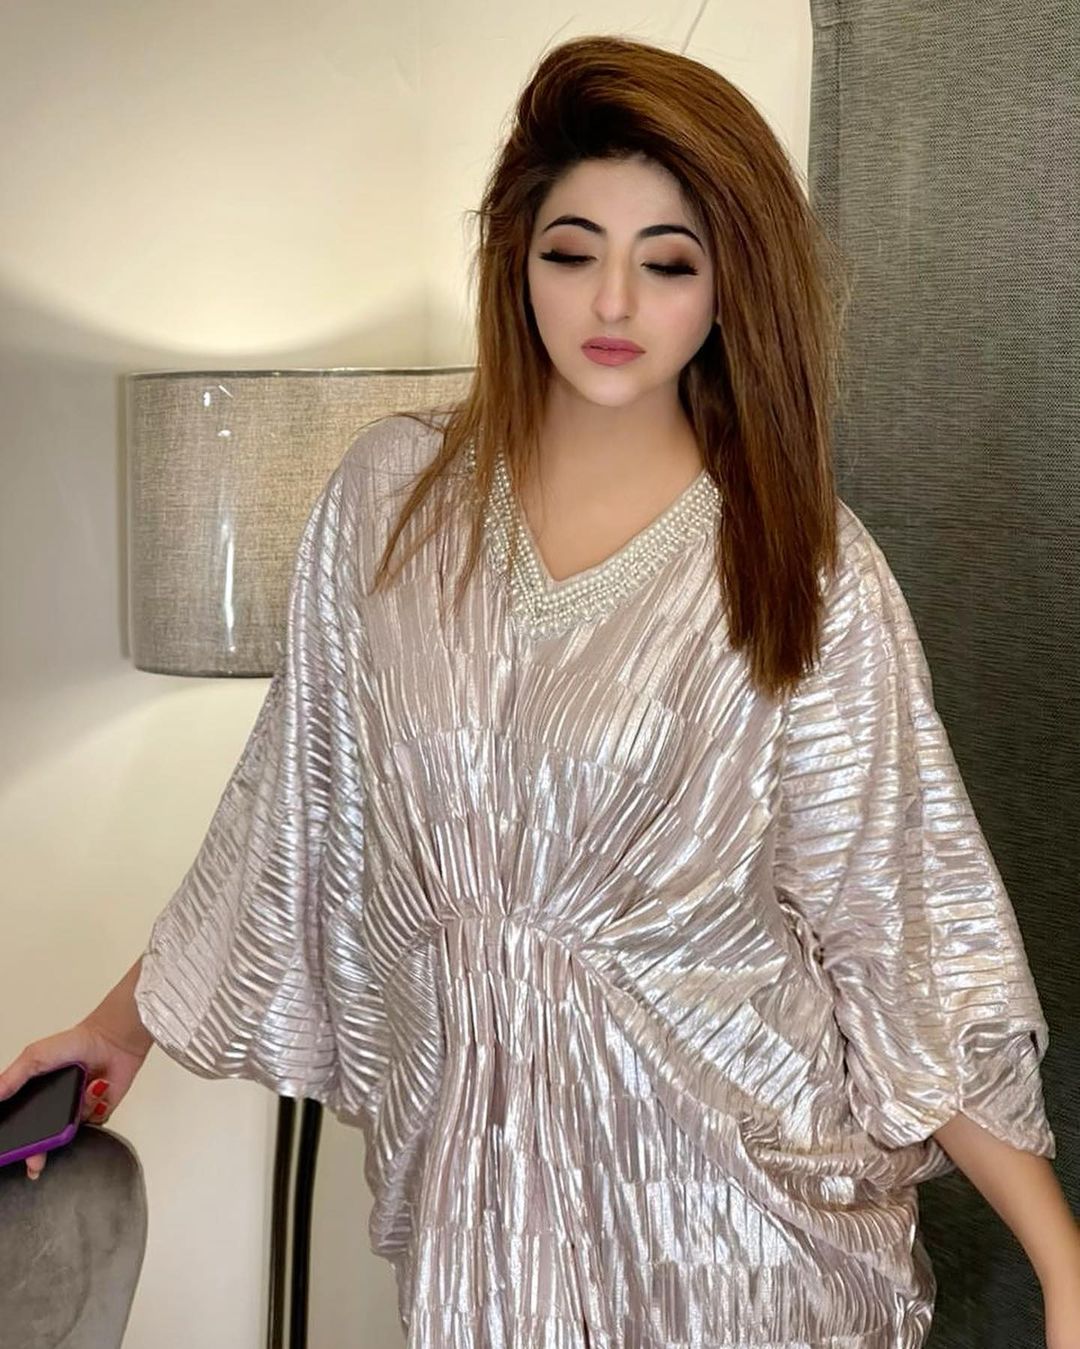 Latest Pictures of Beautiful Actress Fatima Sohail